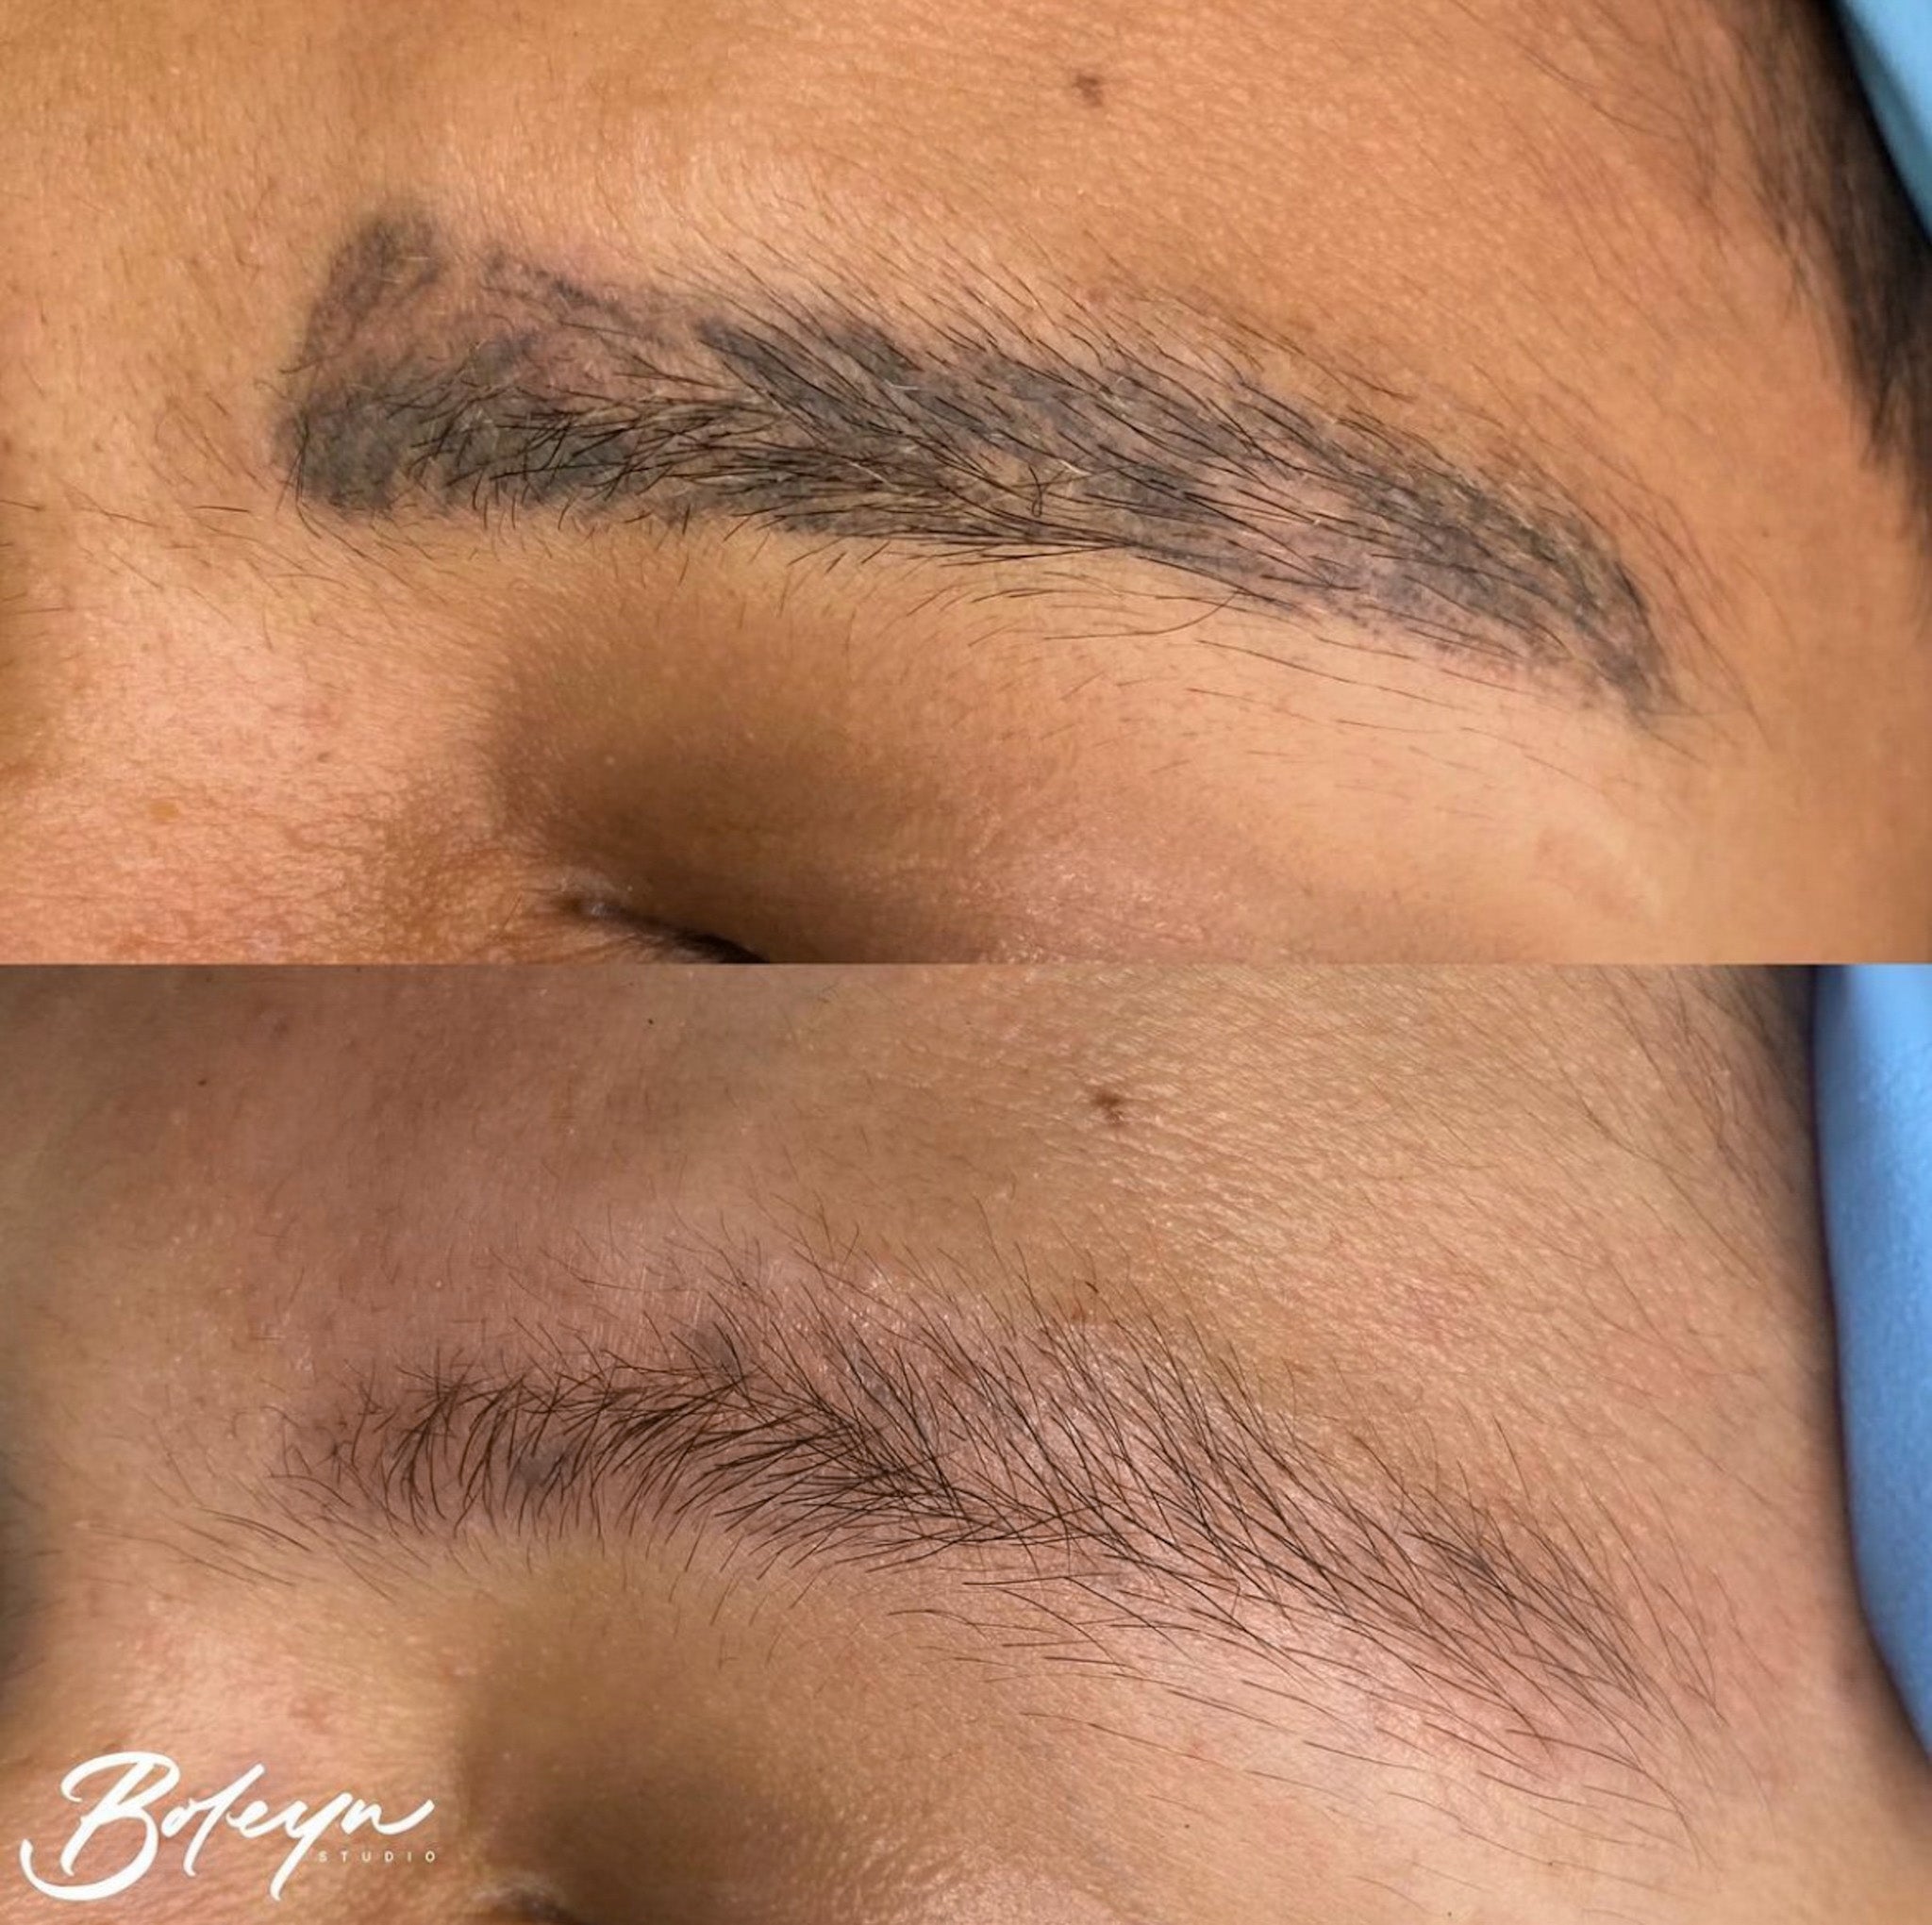 Tattoo/Microblading Removal (Deposit) - Follow Up Session